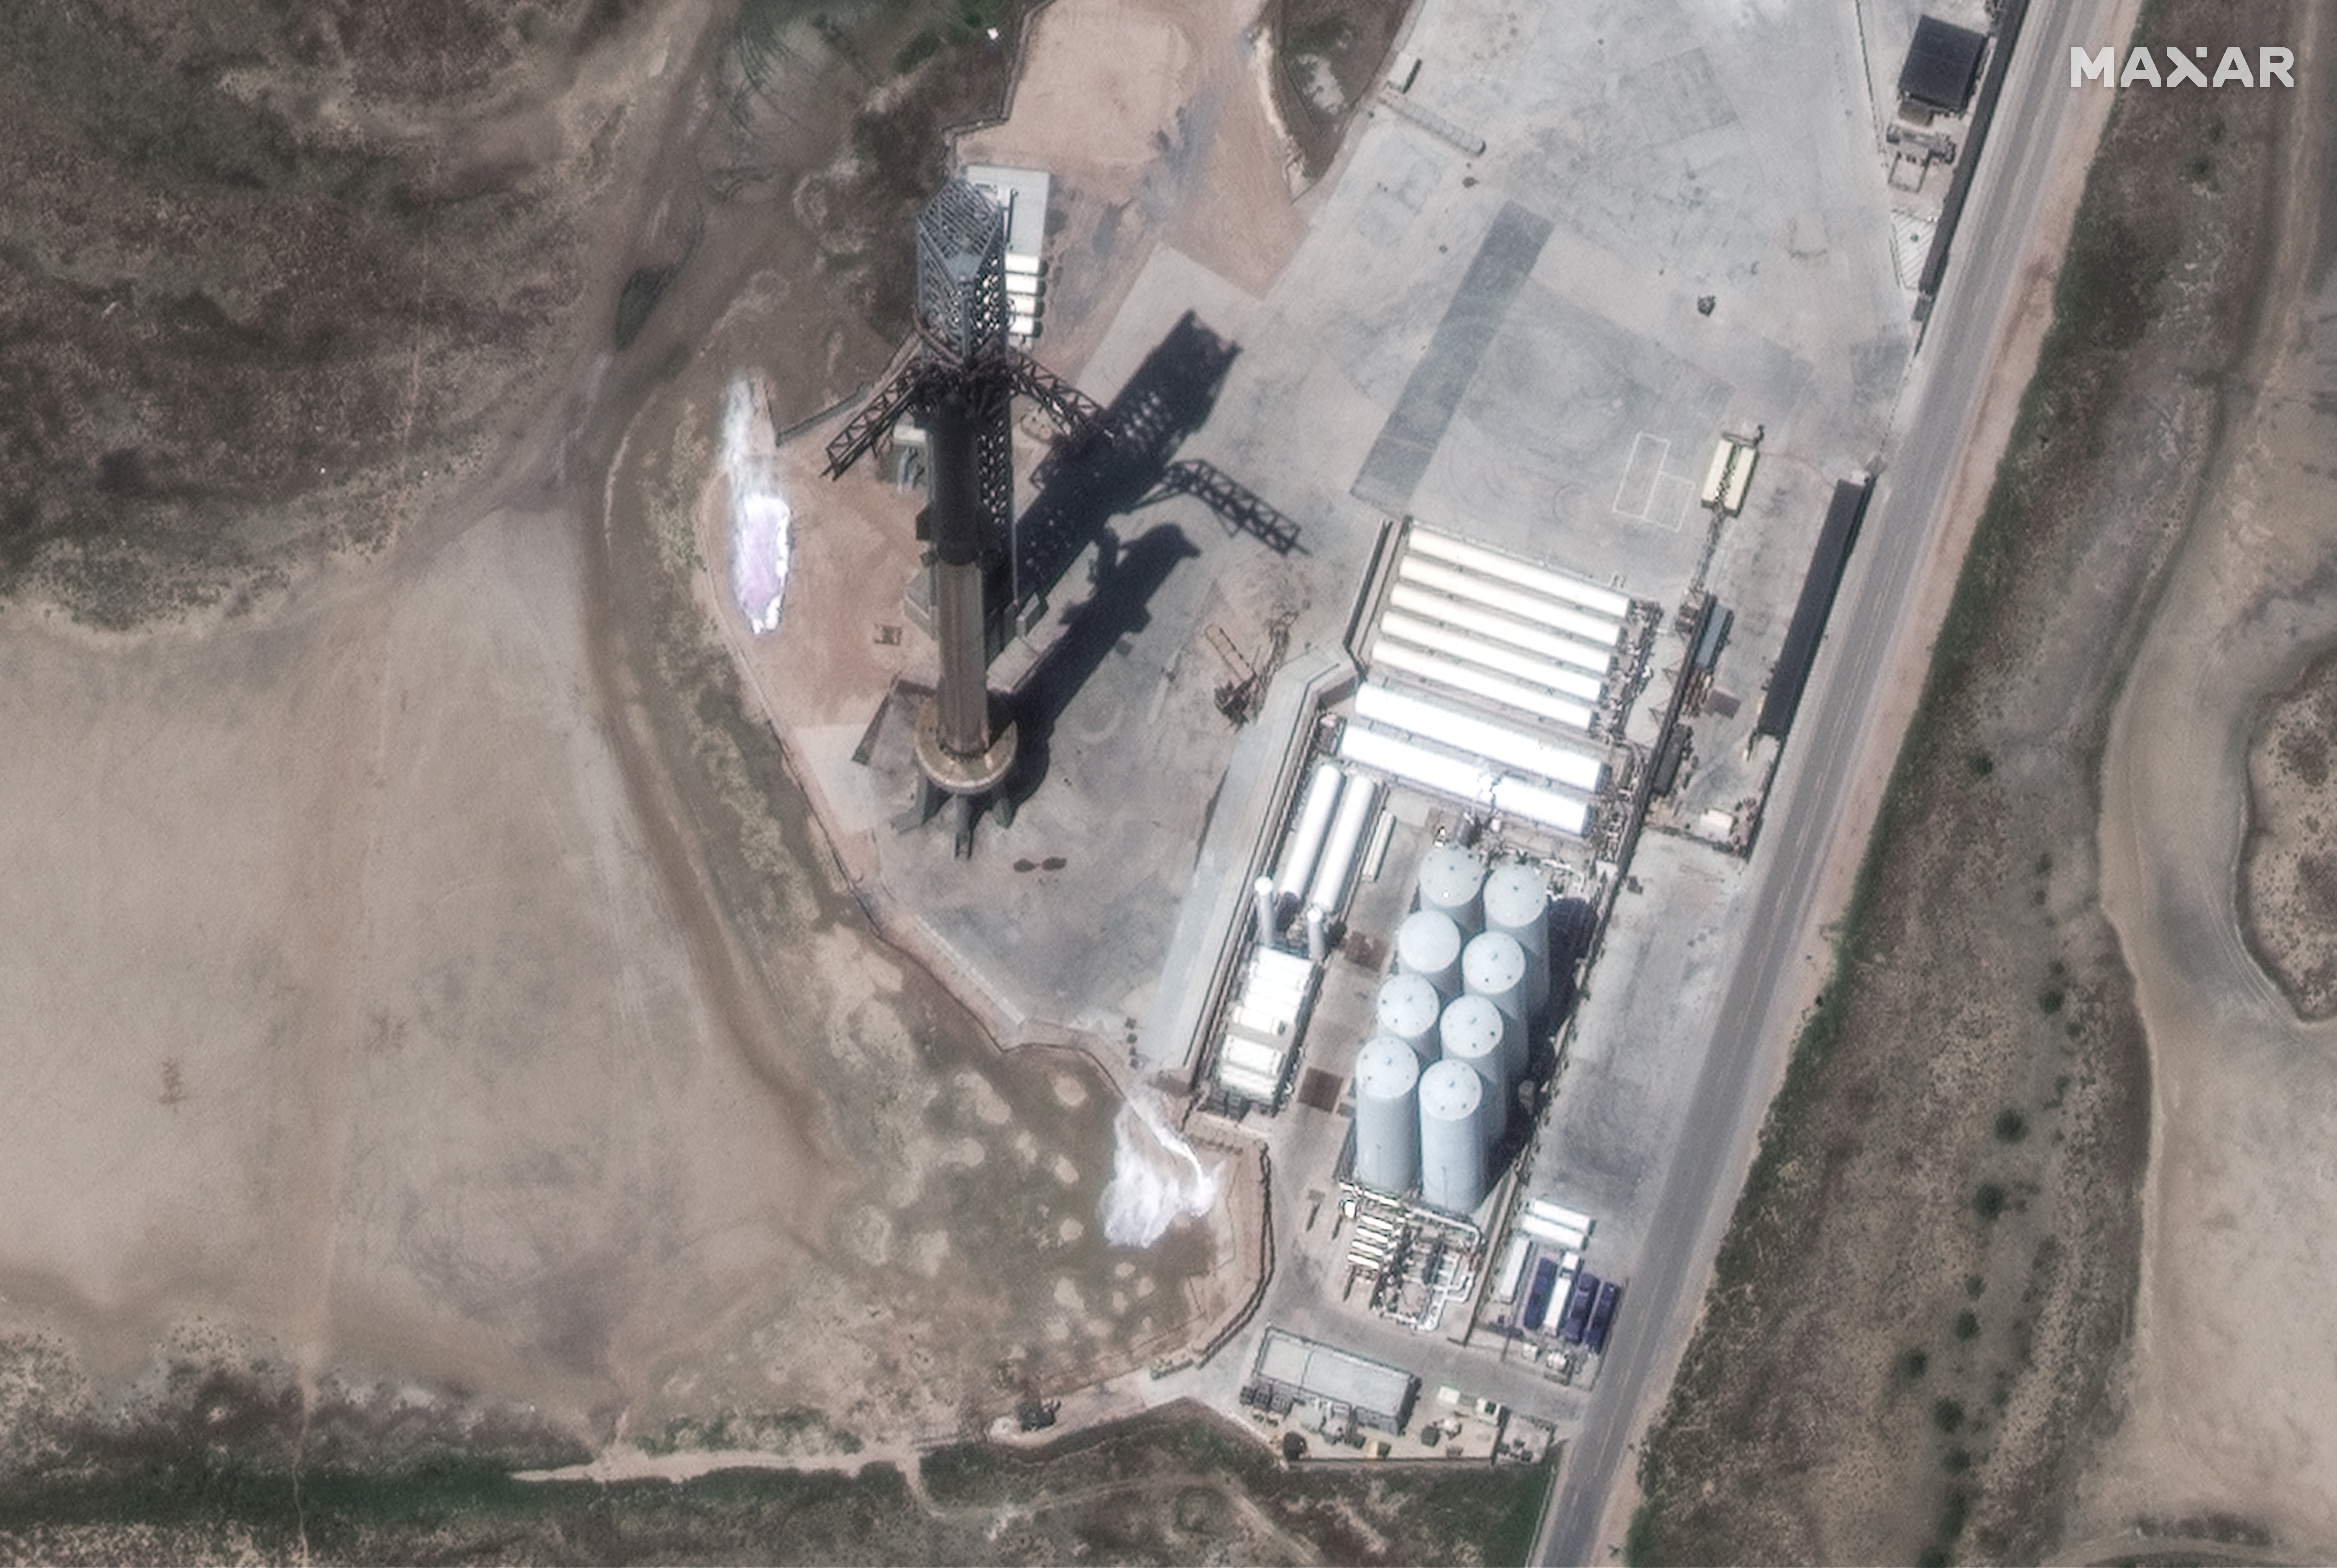 A satellite image shows SpaceX Starship rocket on its launch pad, in Boca Chica, Texas